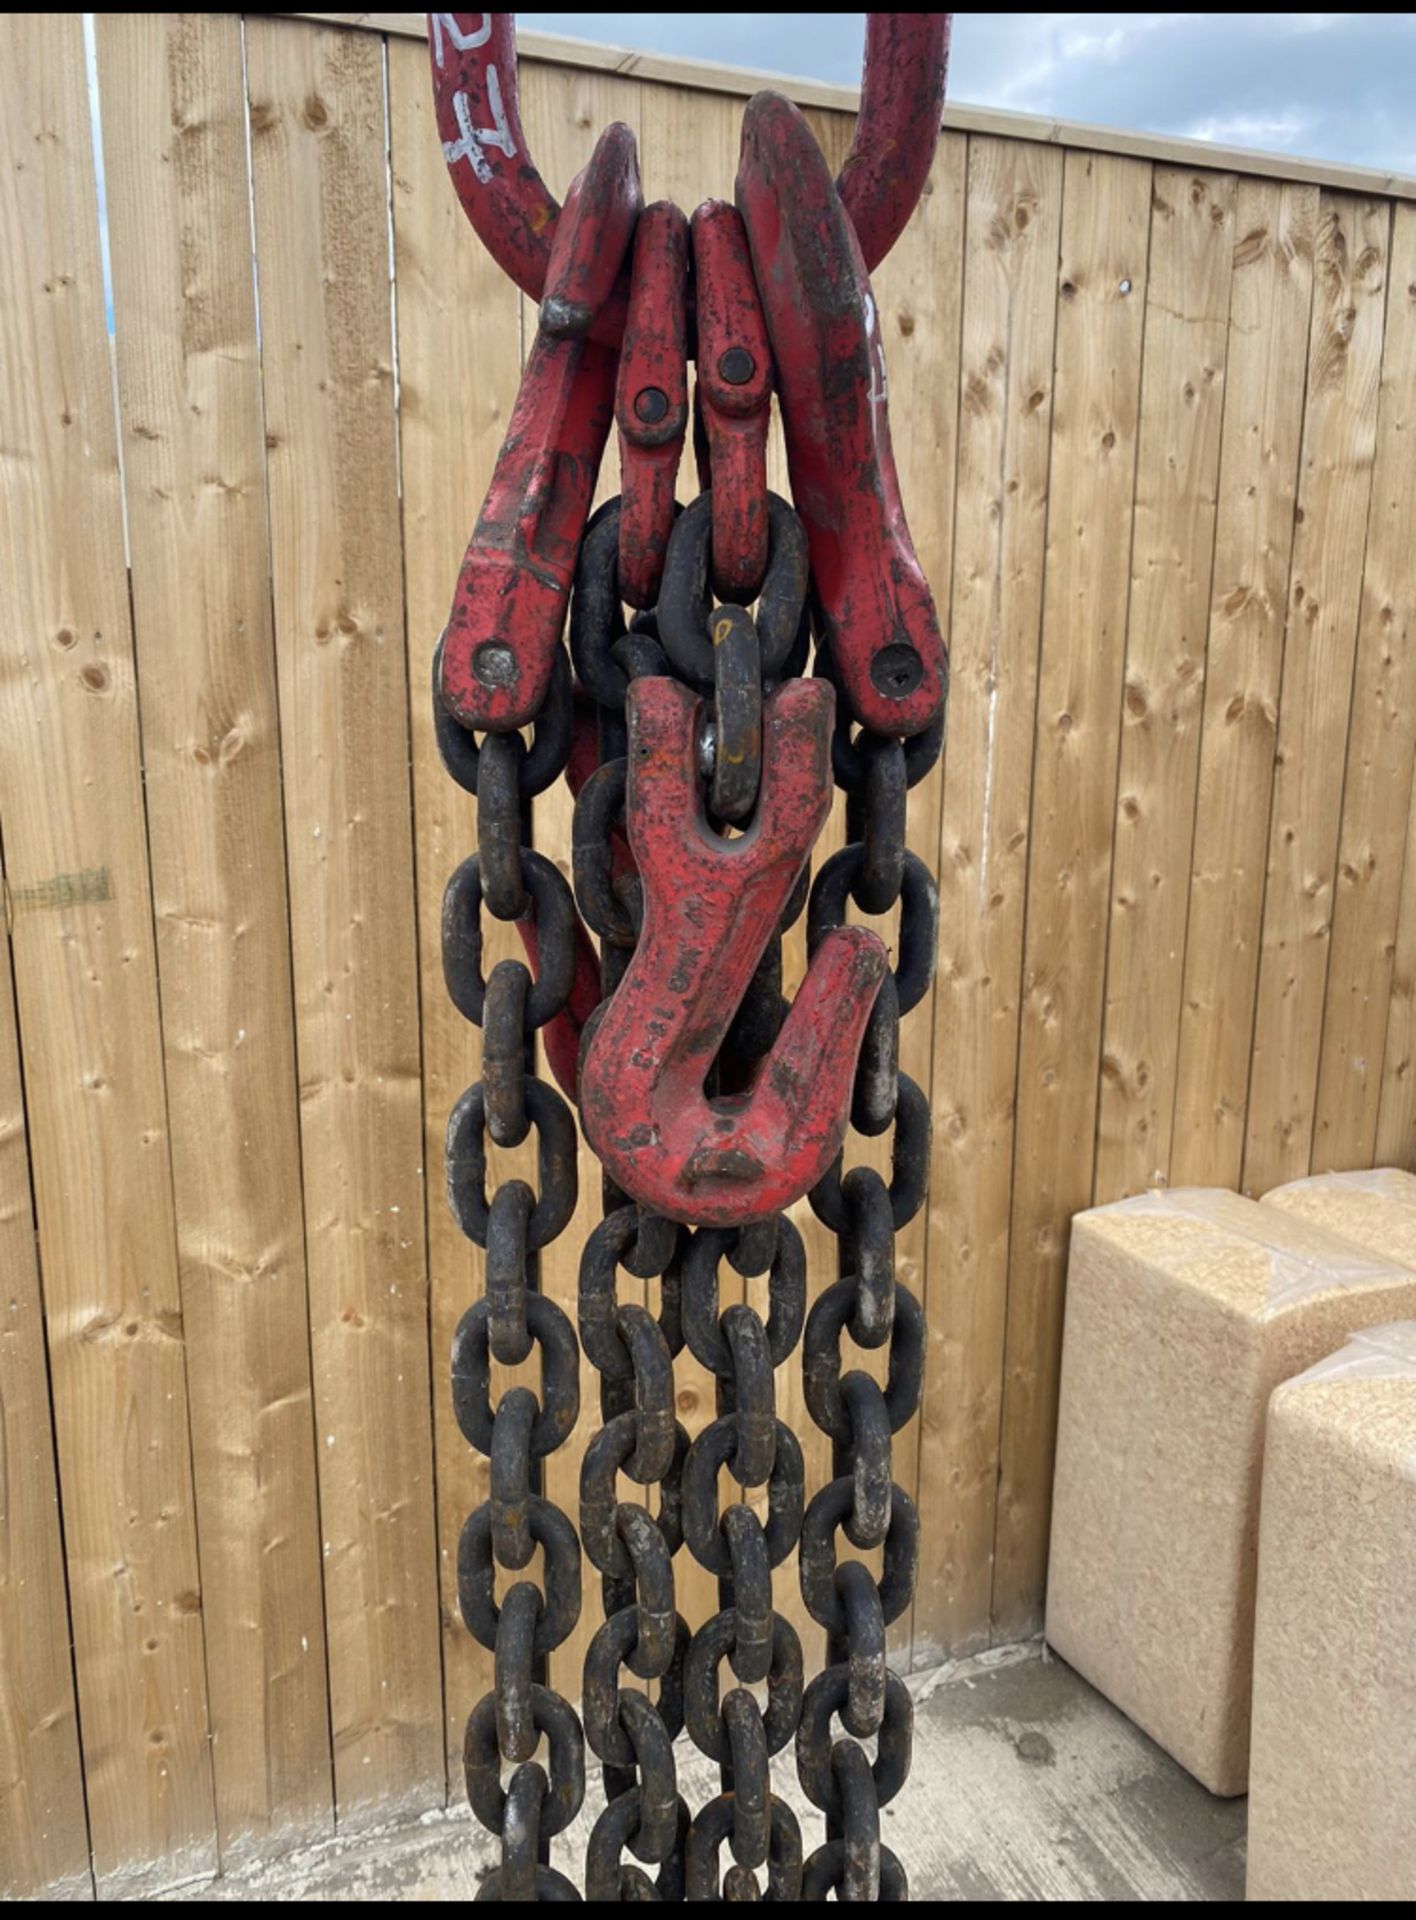 HEAVY DUTY LIFTING CHAINS APPROX 20FT LONG LOCATION: NORTH YORKSHIRE